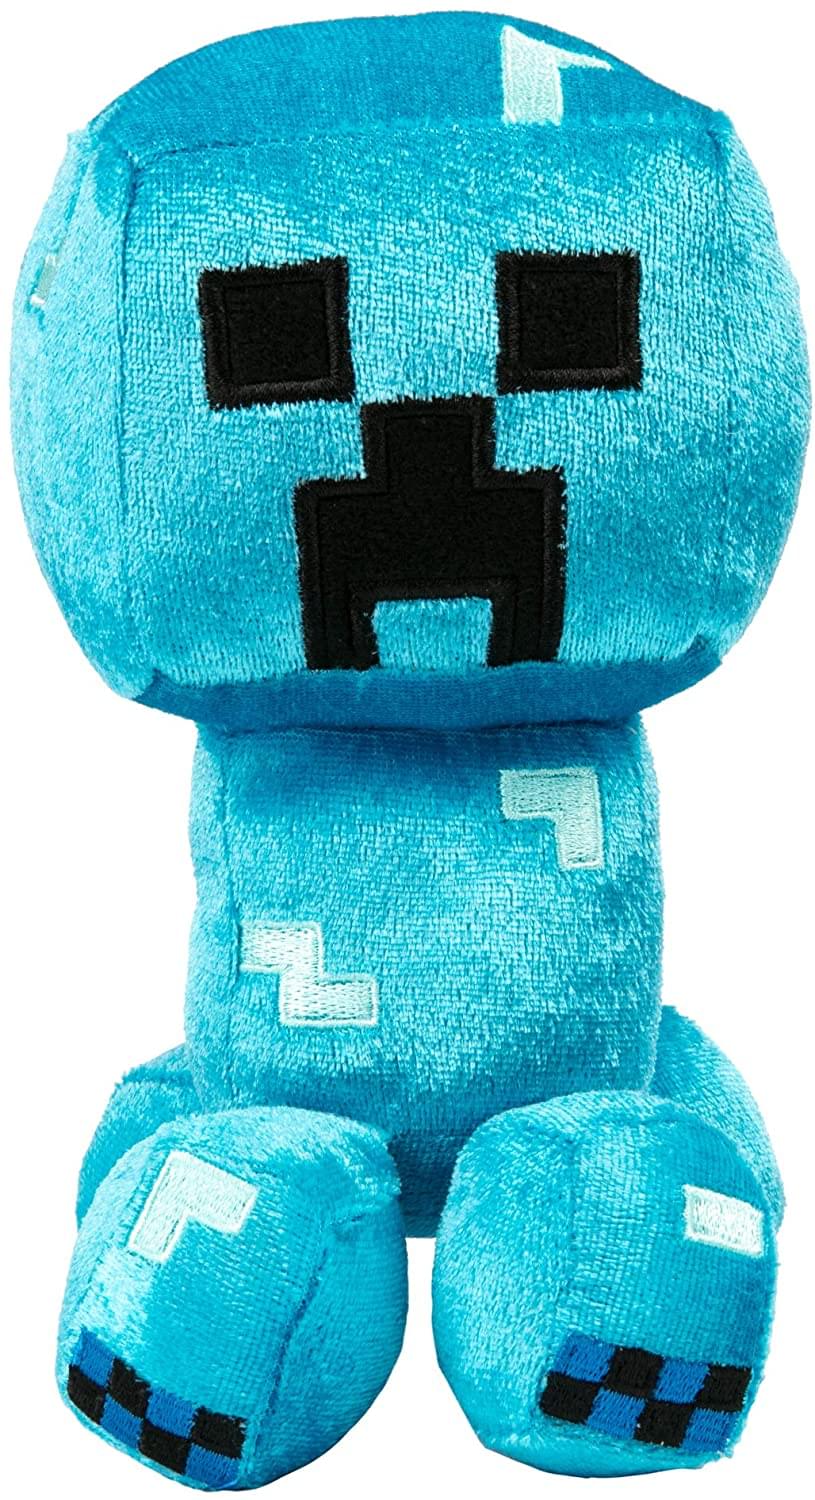 Minecraft Happy Explorer Series 7 Inch Plush | Charged Creeper